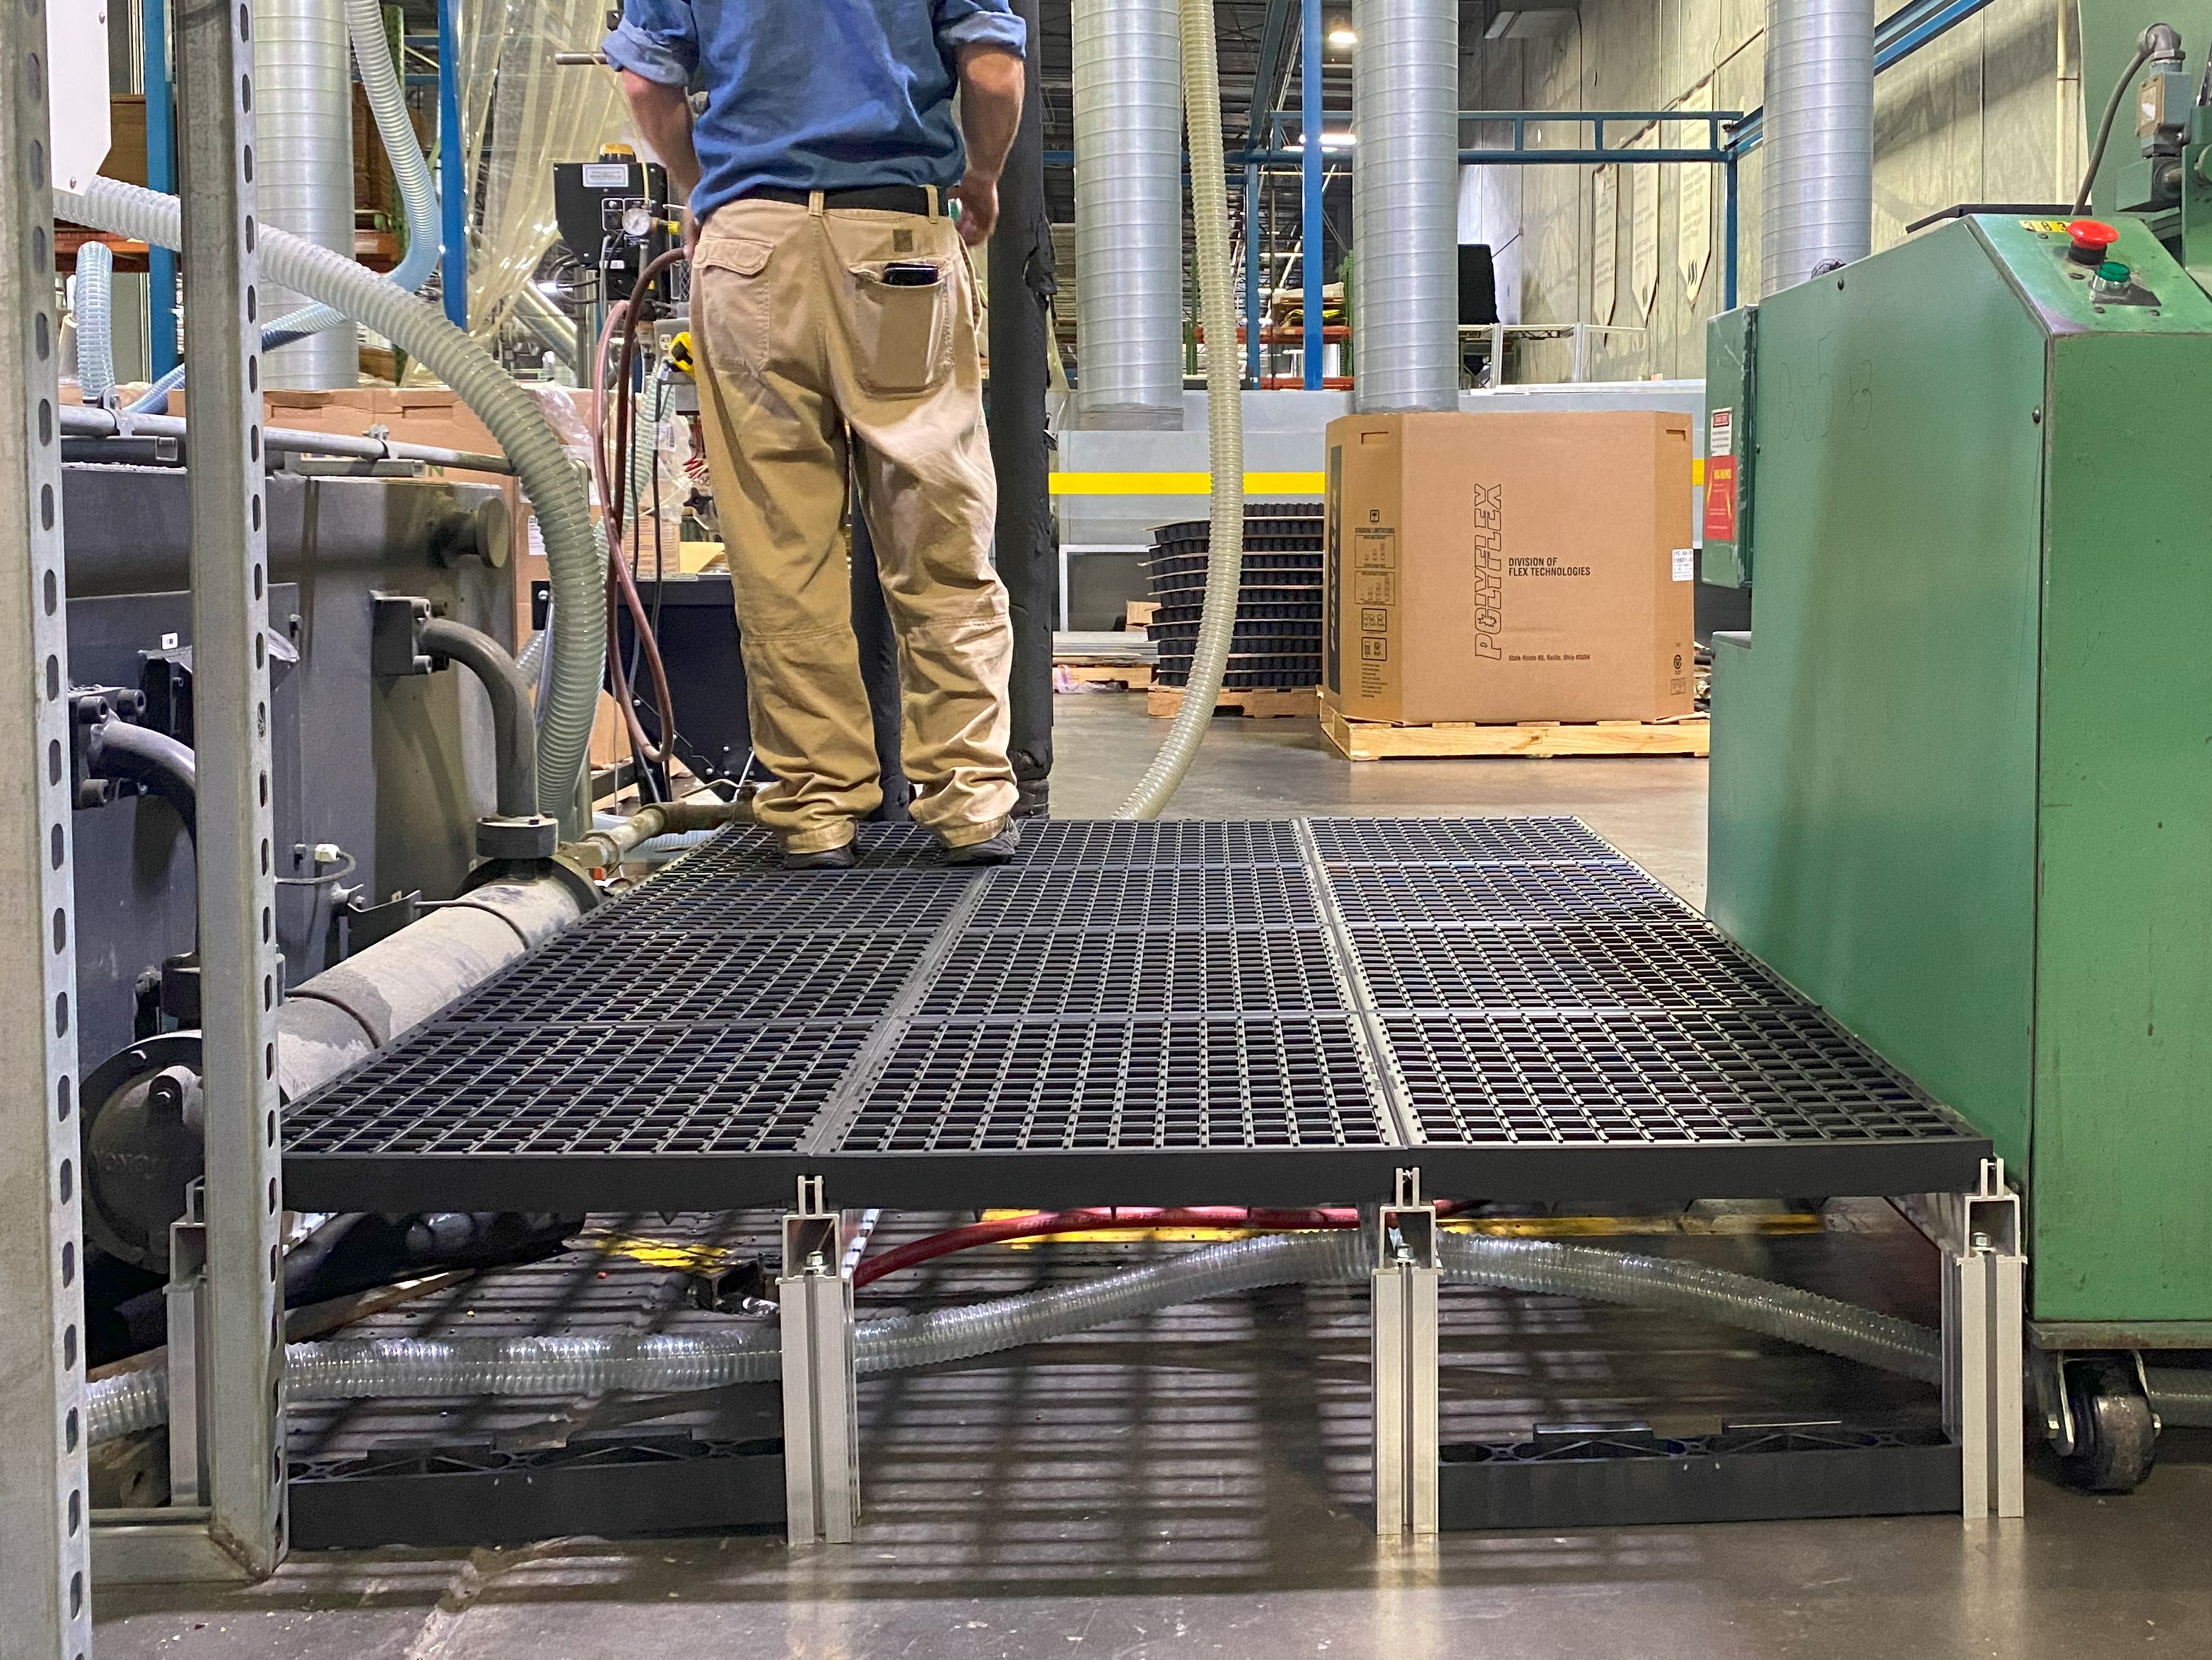 Foundation platform can be high enough for workers to safely run cords underneath the platform